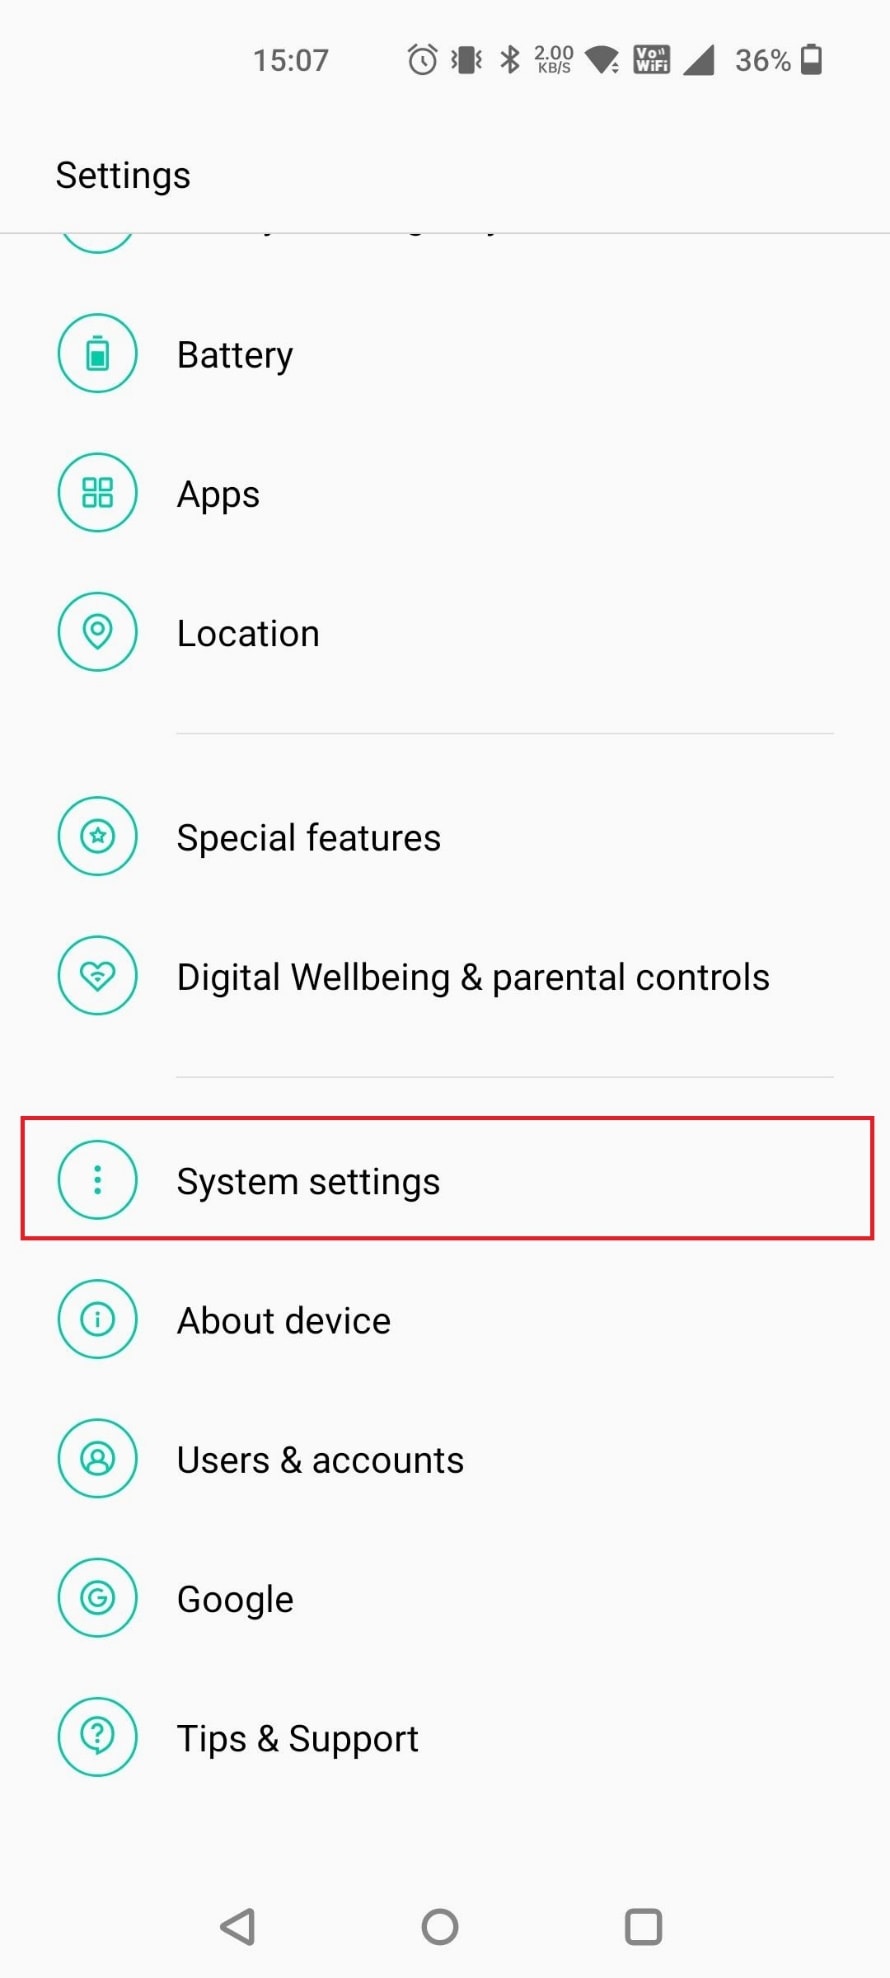 Scroll down and tap on System settings.